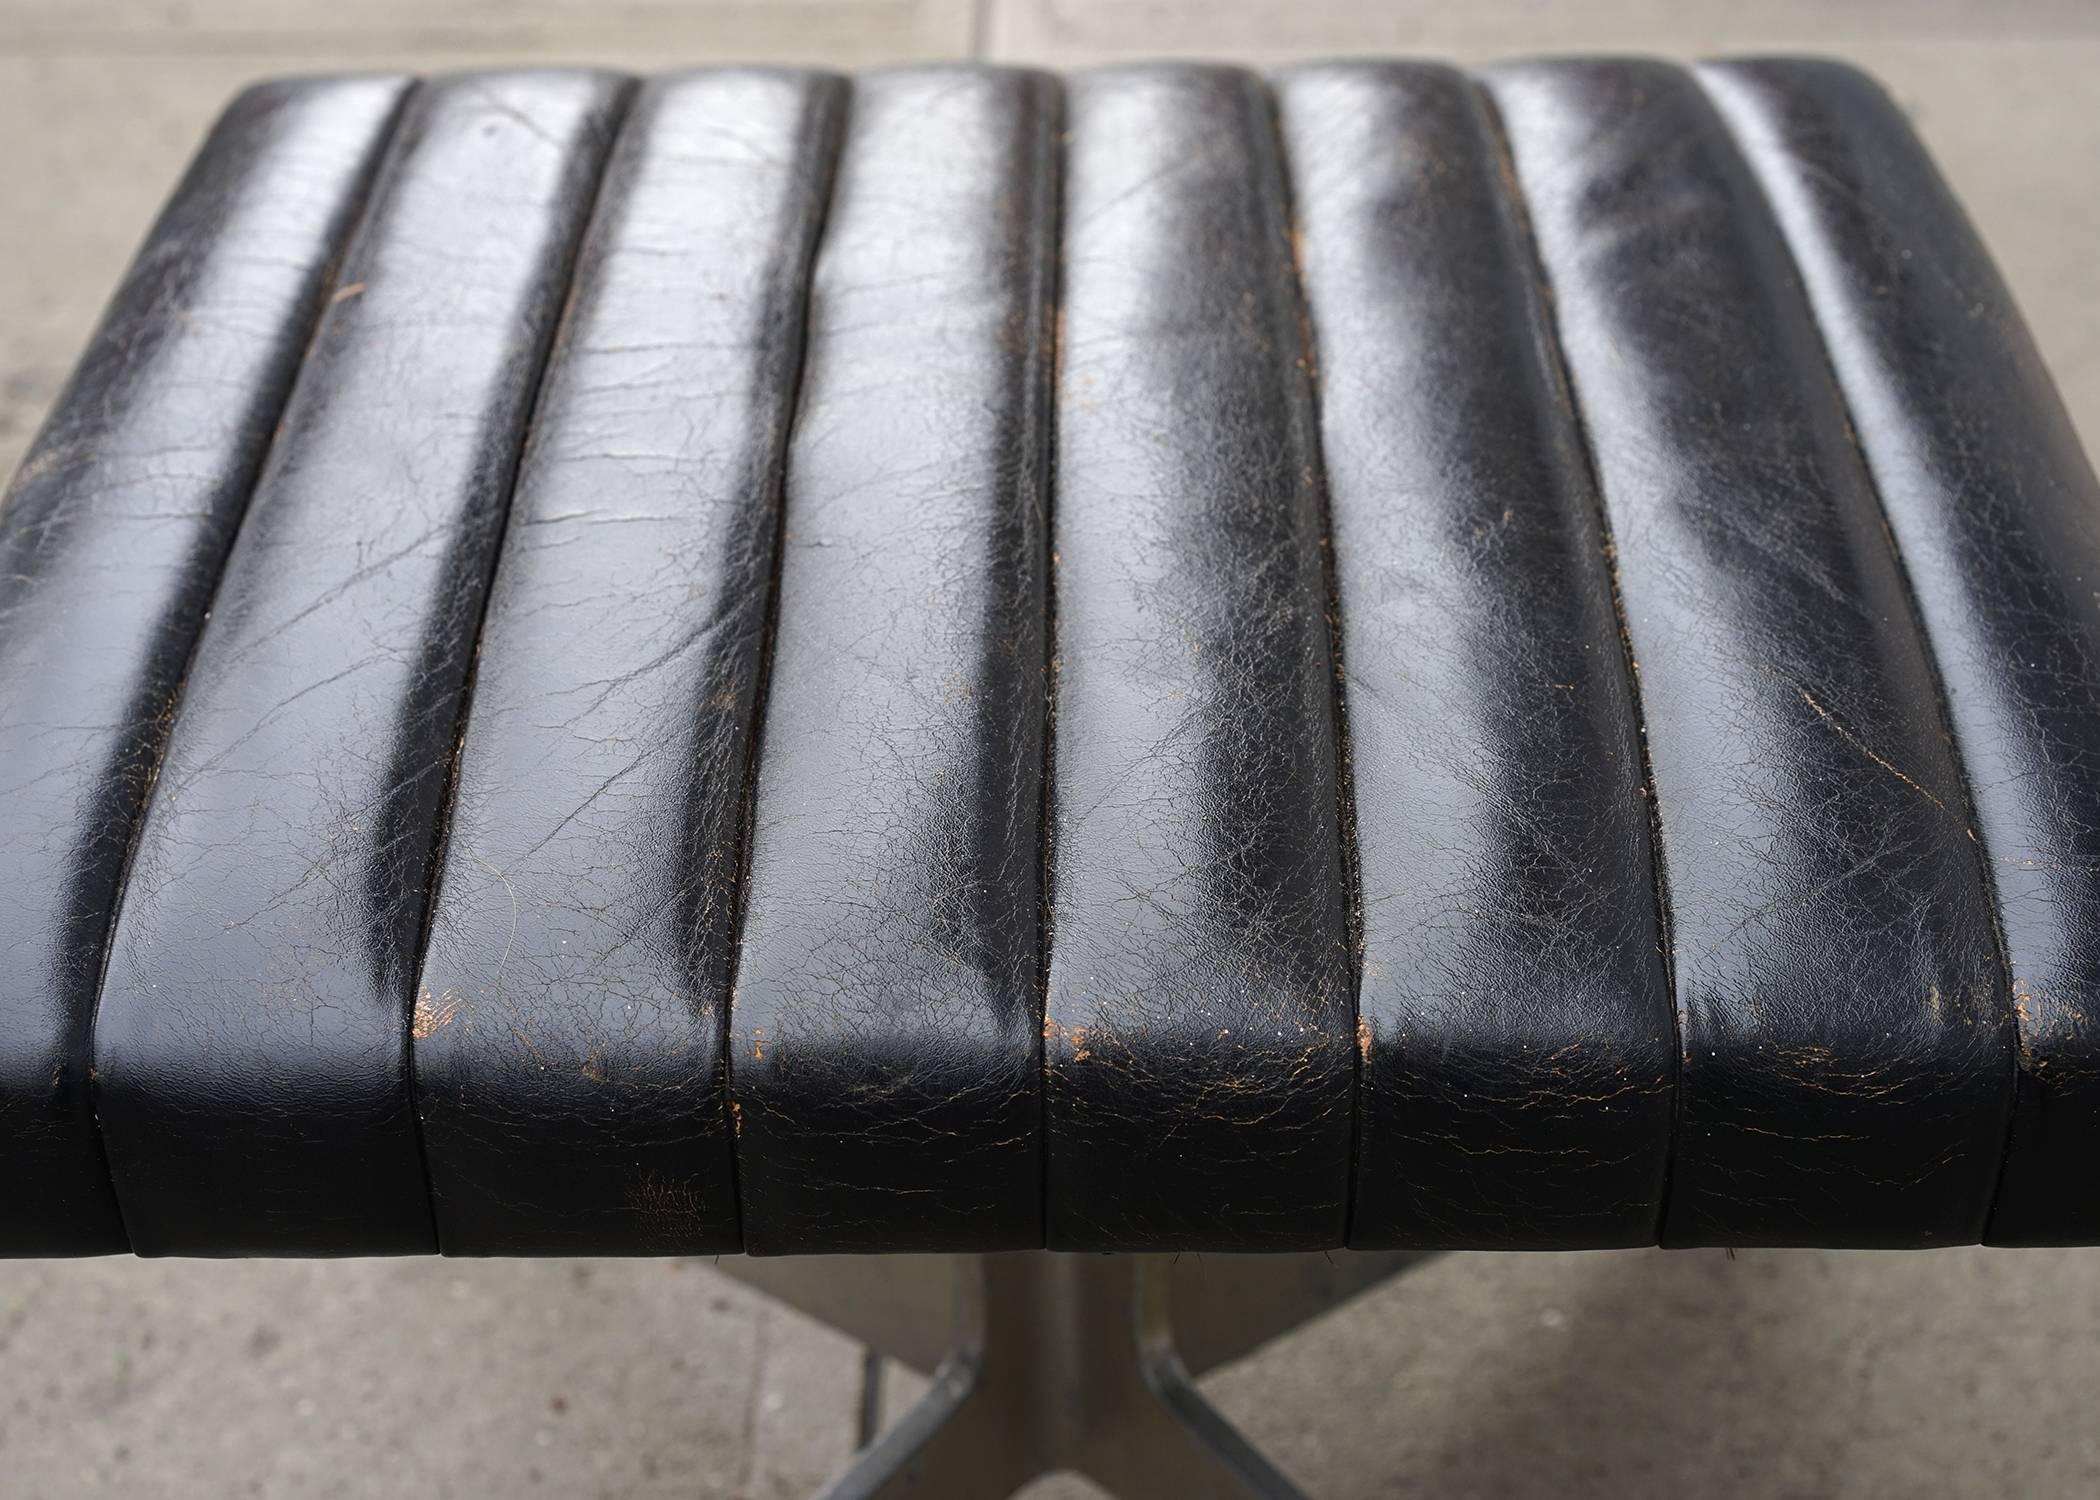 Elegantly handsome with clean, modern lines and original channel tufted leather upholstery. Lovely natural patina. Versatile as a stool or ottoman.